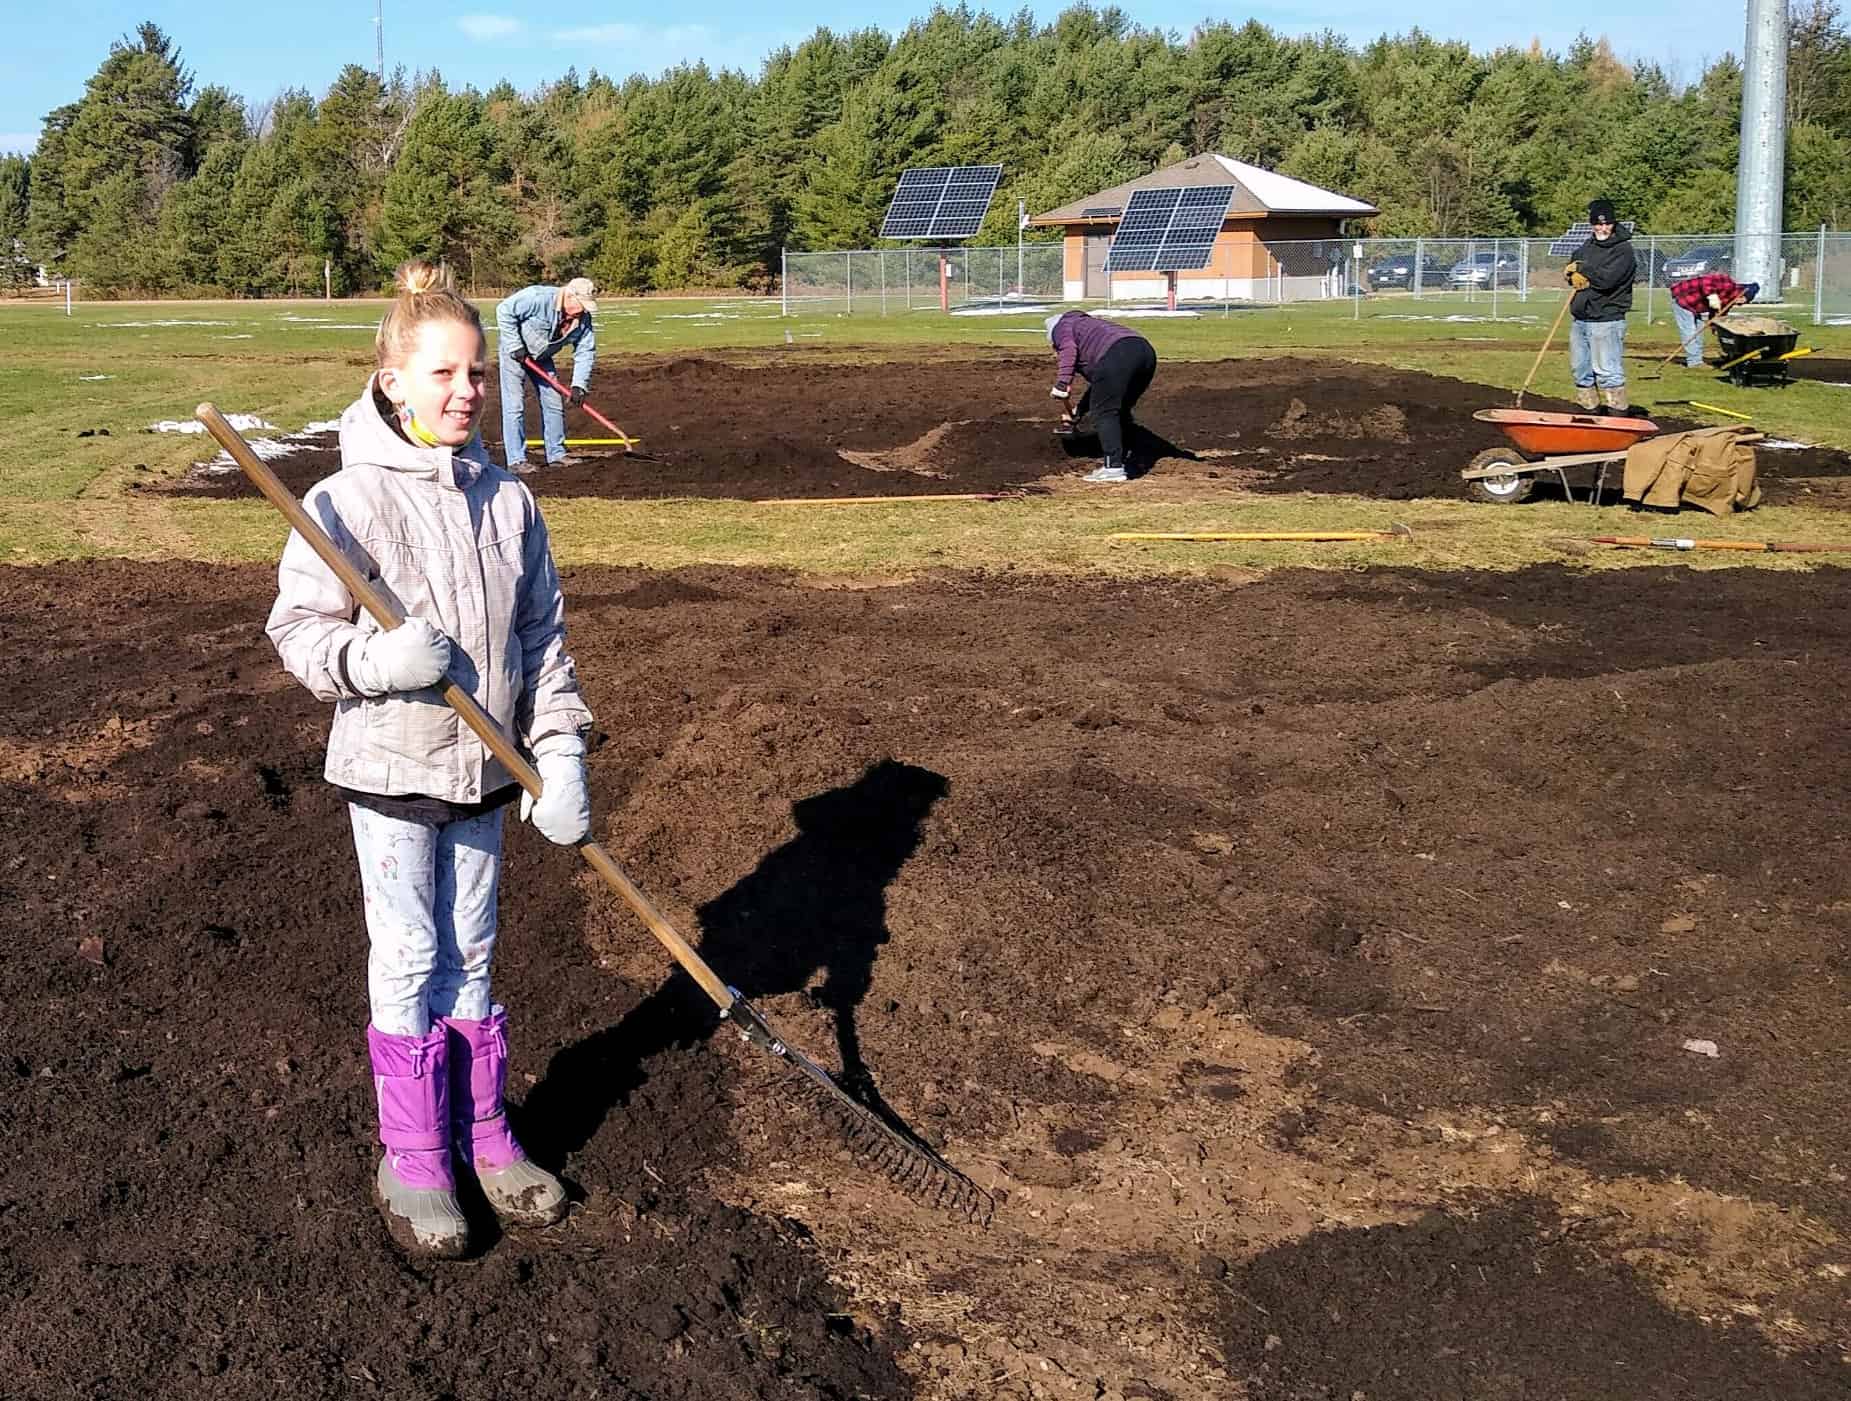 Oneida County 4-H, other organizations to offer youth gardening programs